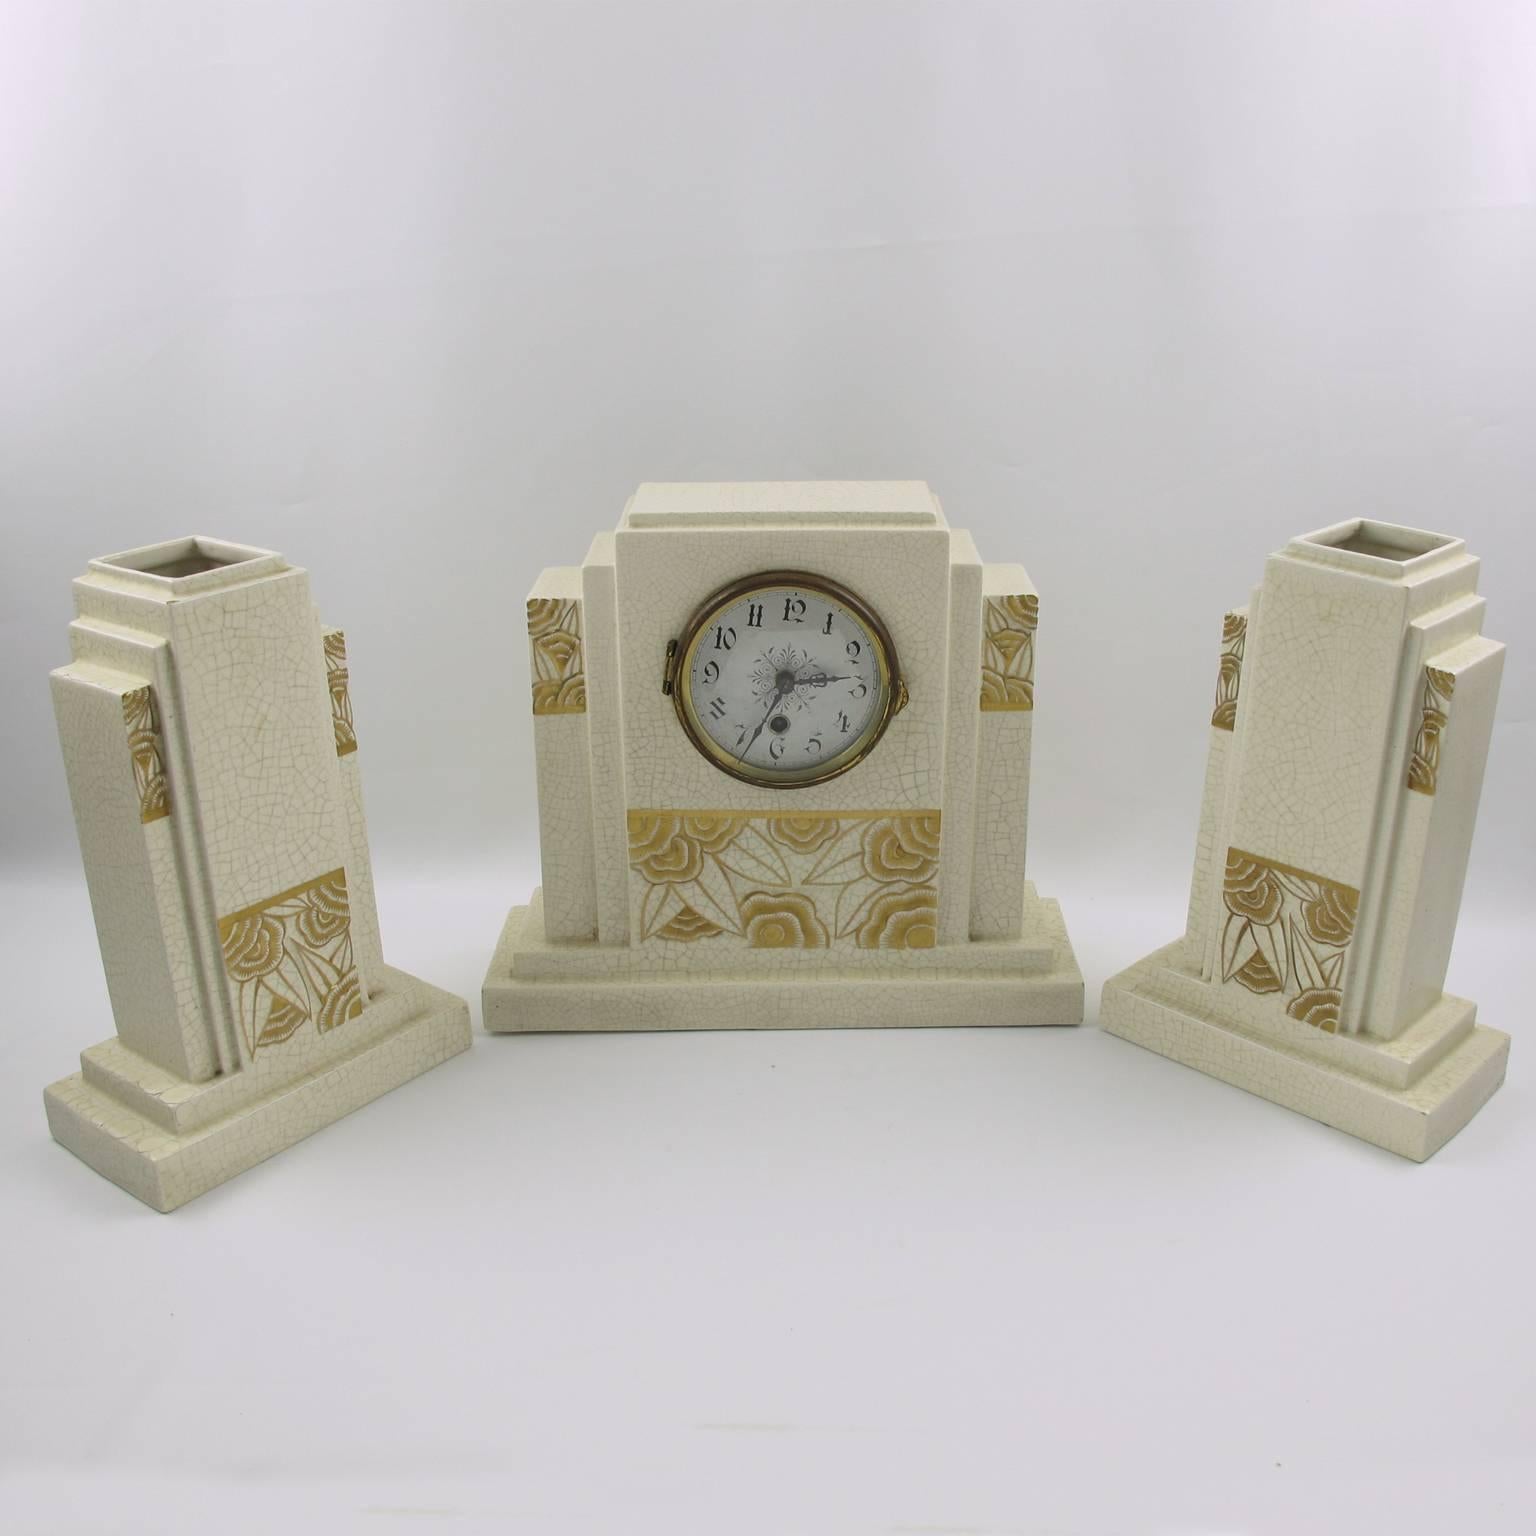 Elegant vintage Art Deco mantel clock set with garniture by Orchies Manufacturer, France. French ceramic body with white crackle glaze finish and carved typical Art Deco stylized floral design with gilt application. Impressive skyscraper geometric